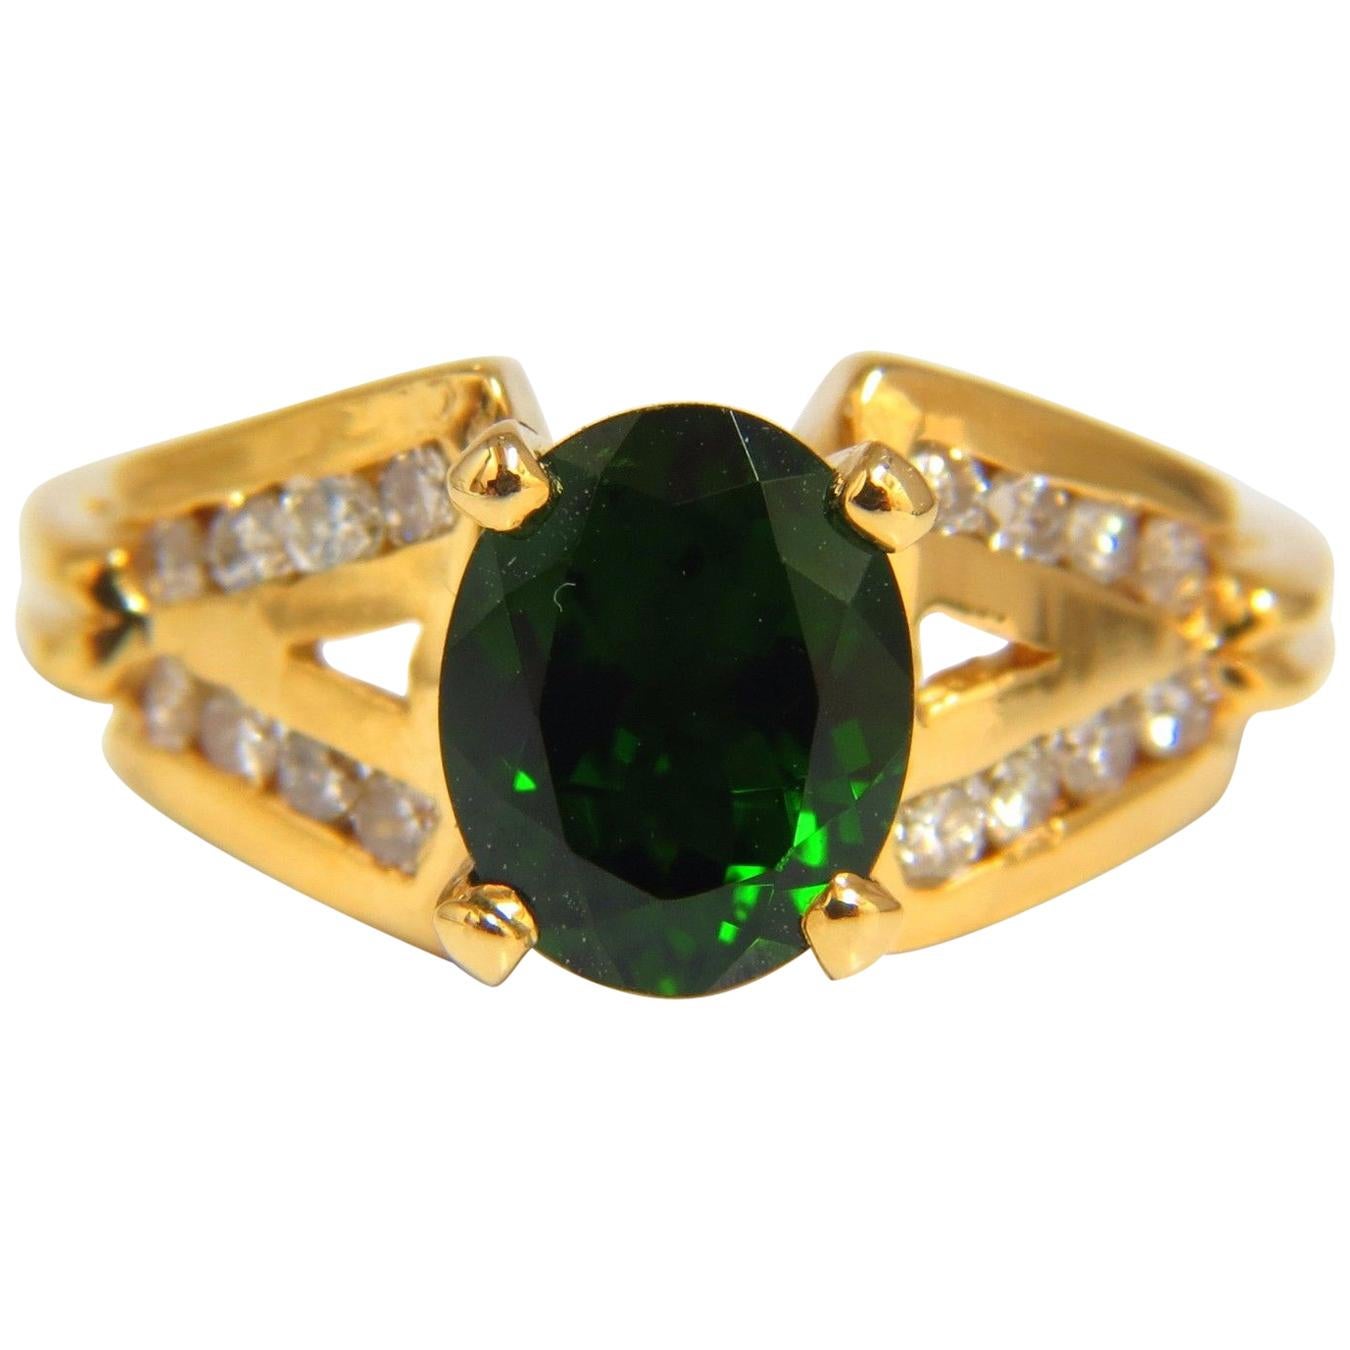 GIA Certified 2.49ct Natural vivid Green Chrome Diopside diamonds ring 14kt